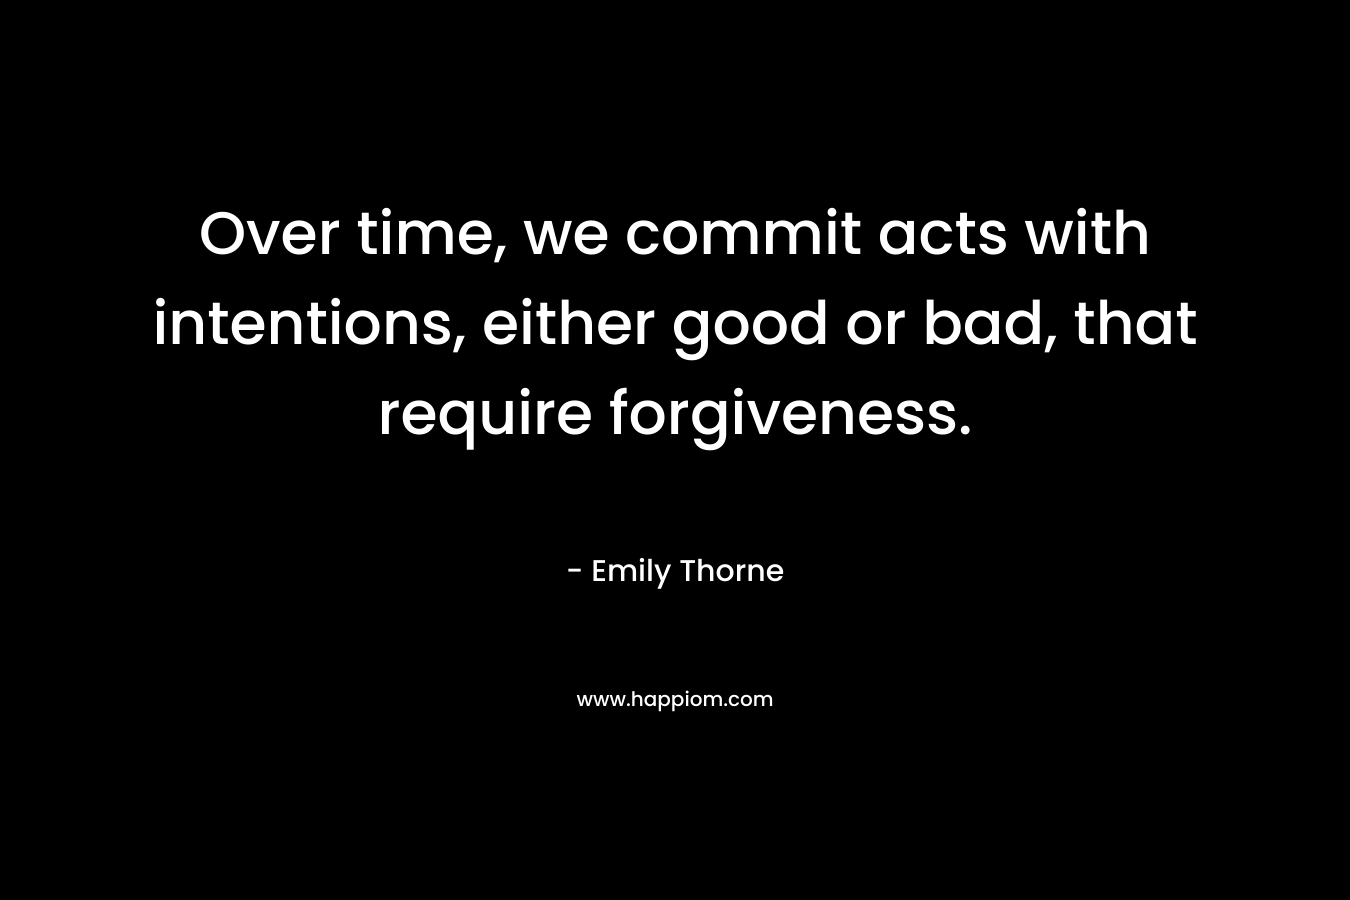 Over time, we commit acts with intentions, either good or bad, that require forgiveness.